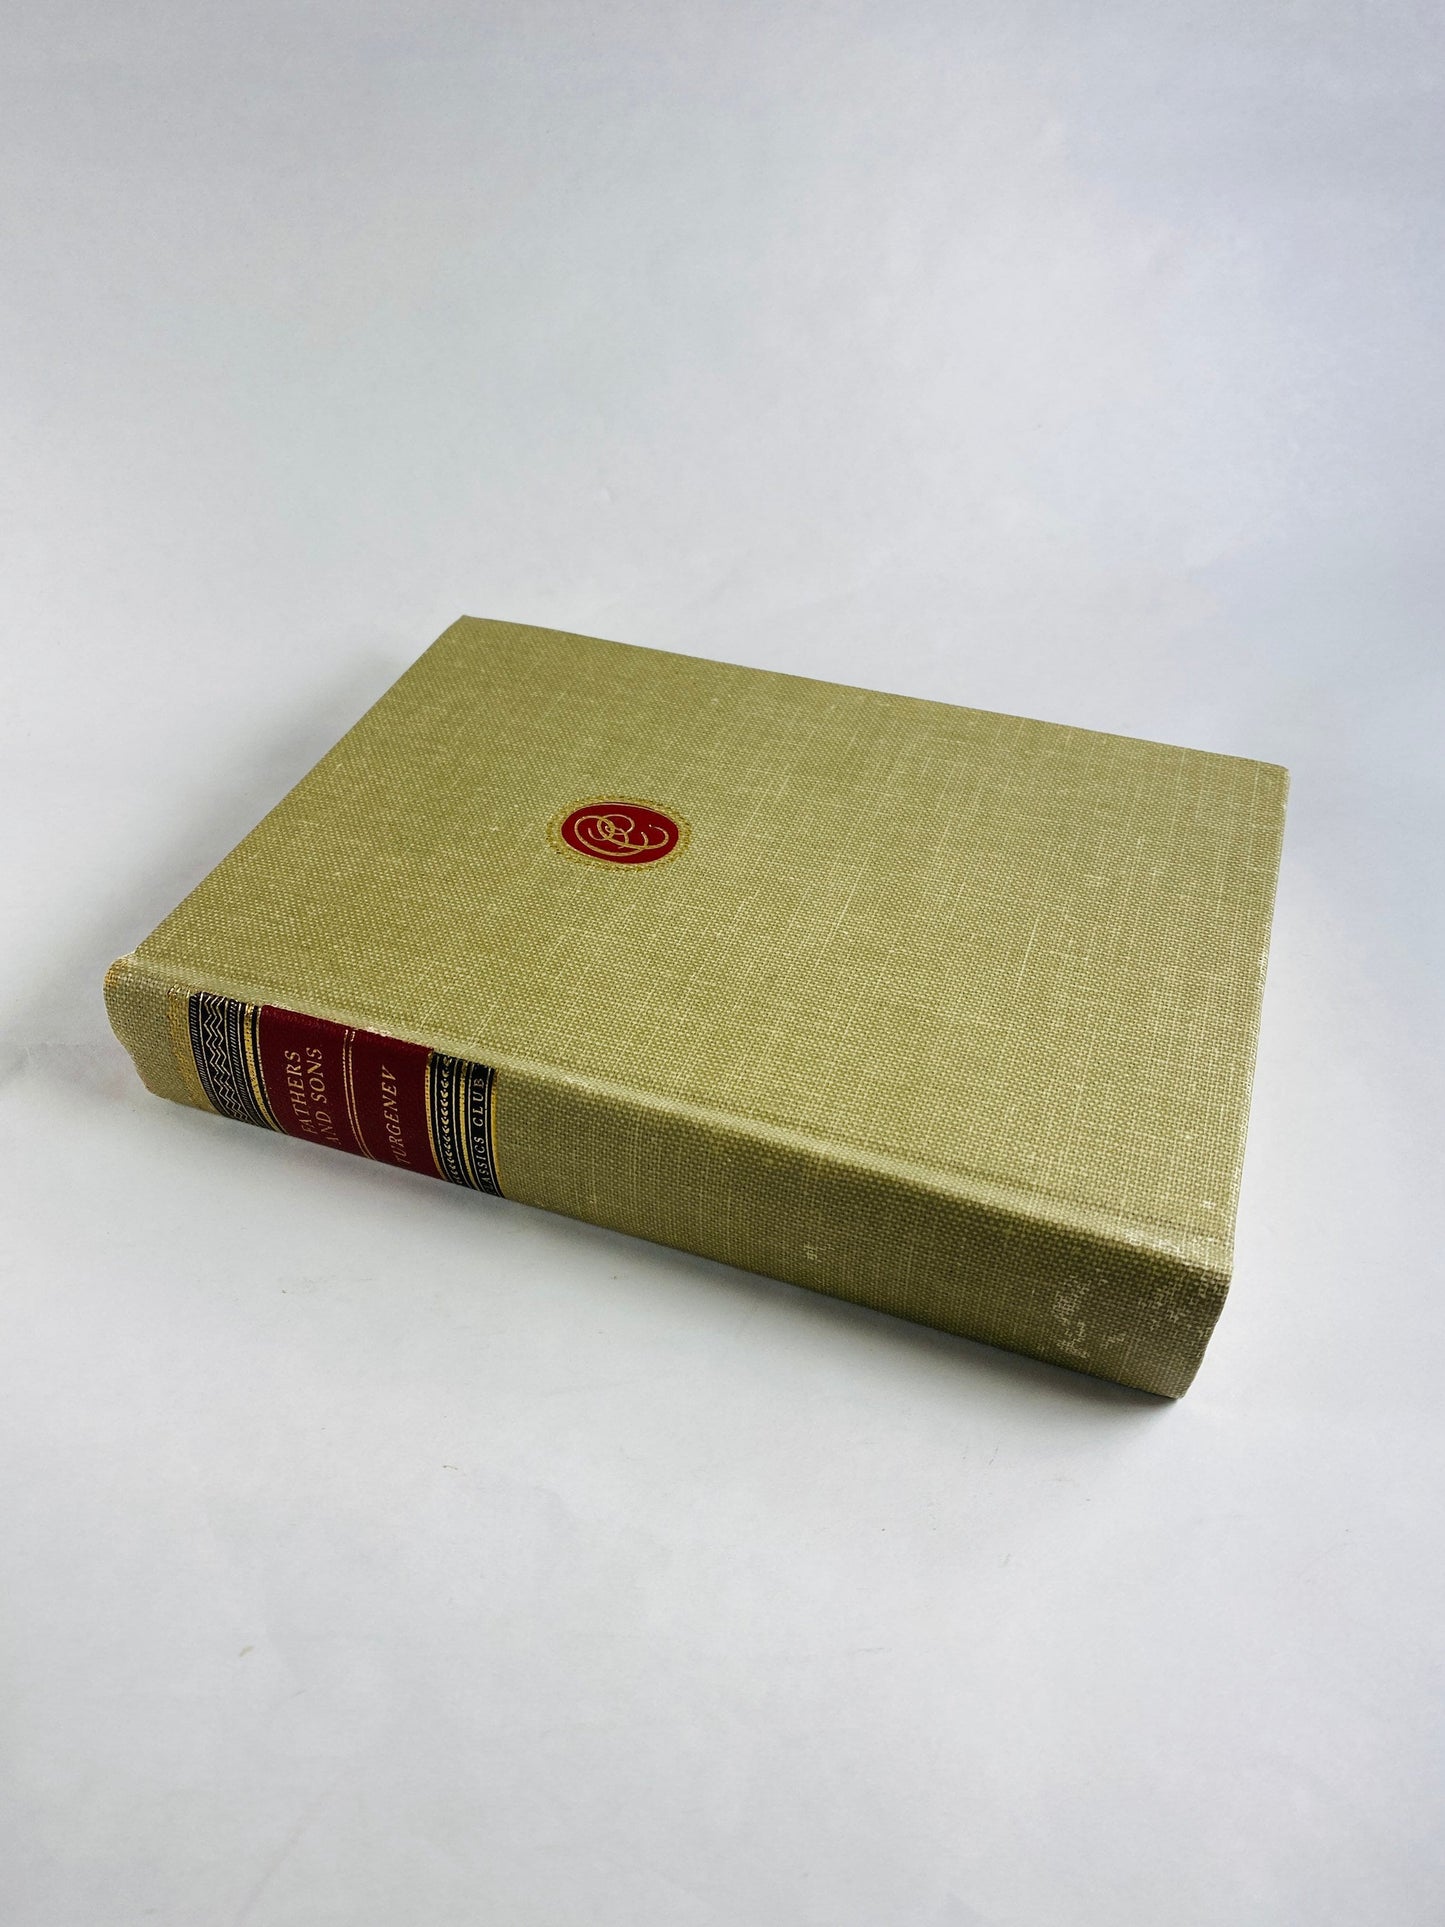 Fathers and Sons by Ivan Turgenev Vintage book circa 1942 beige cloth binding w/ gold trim.